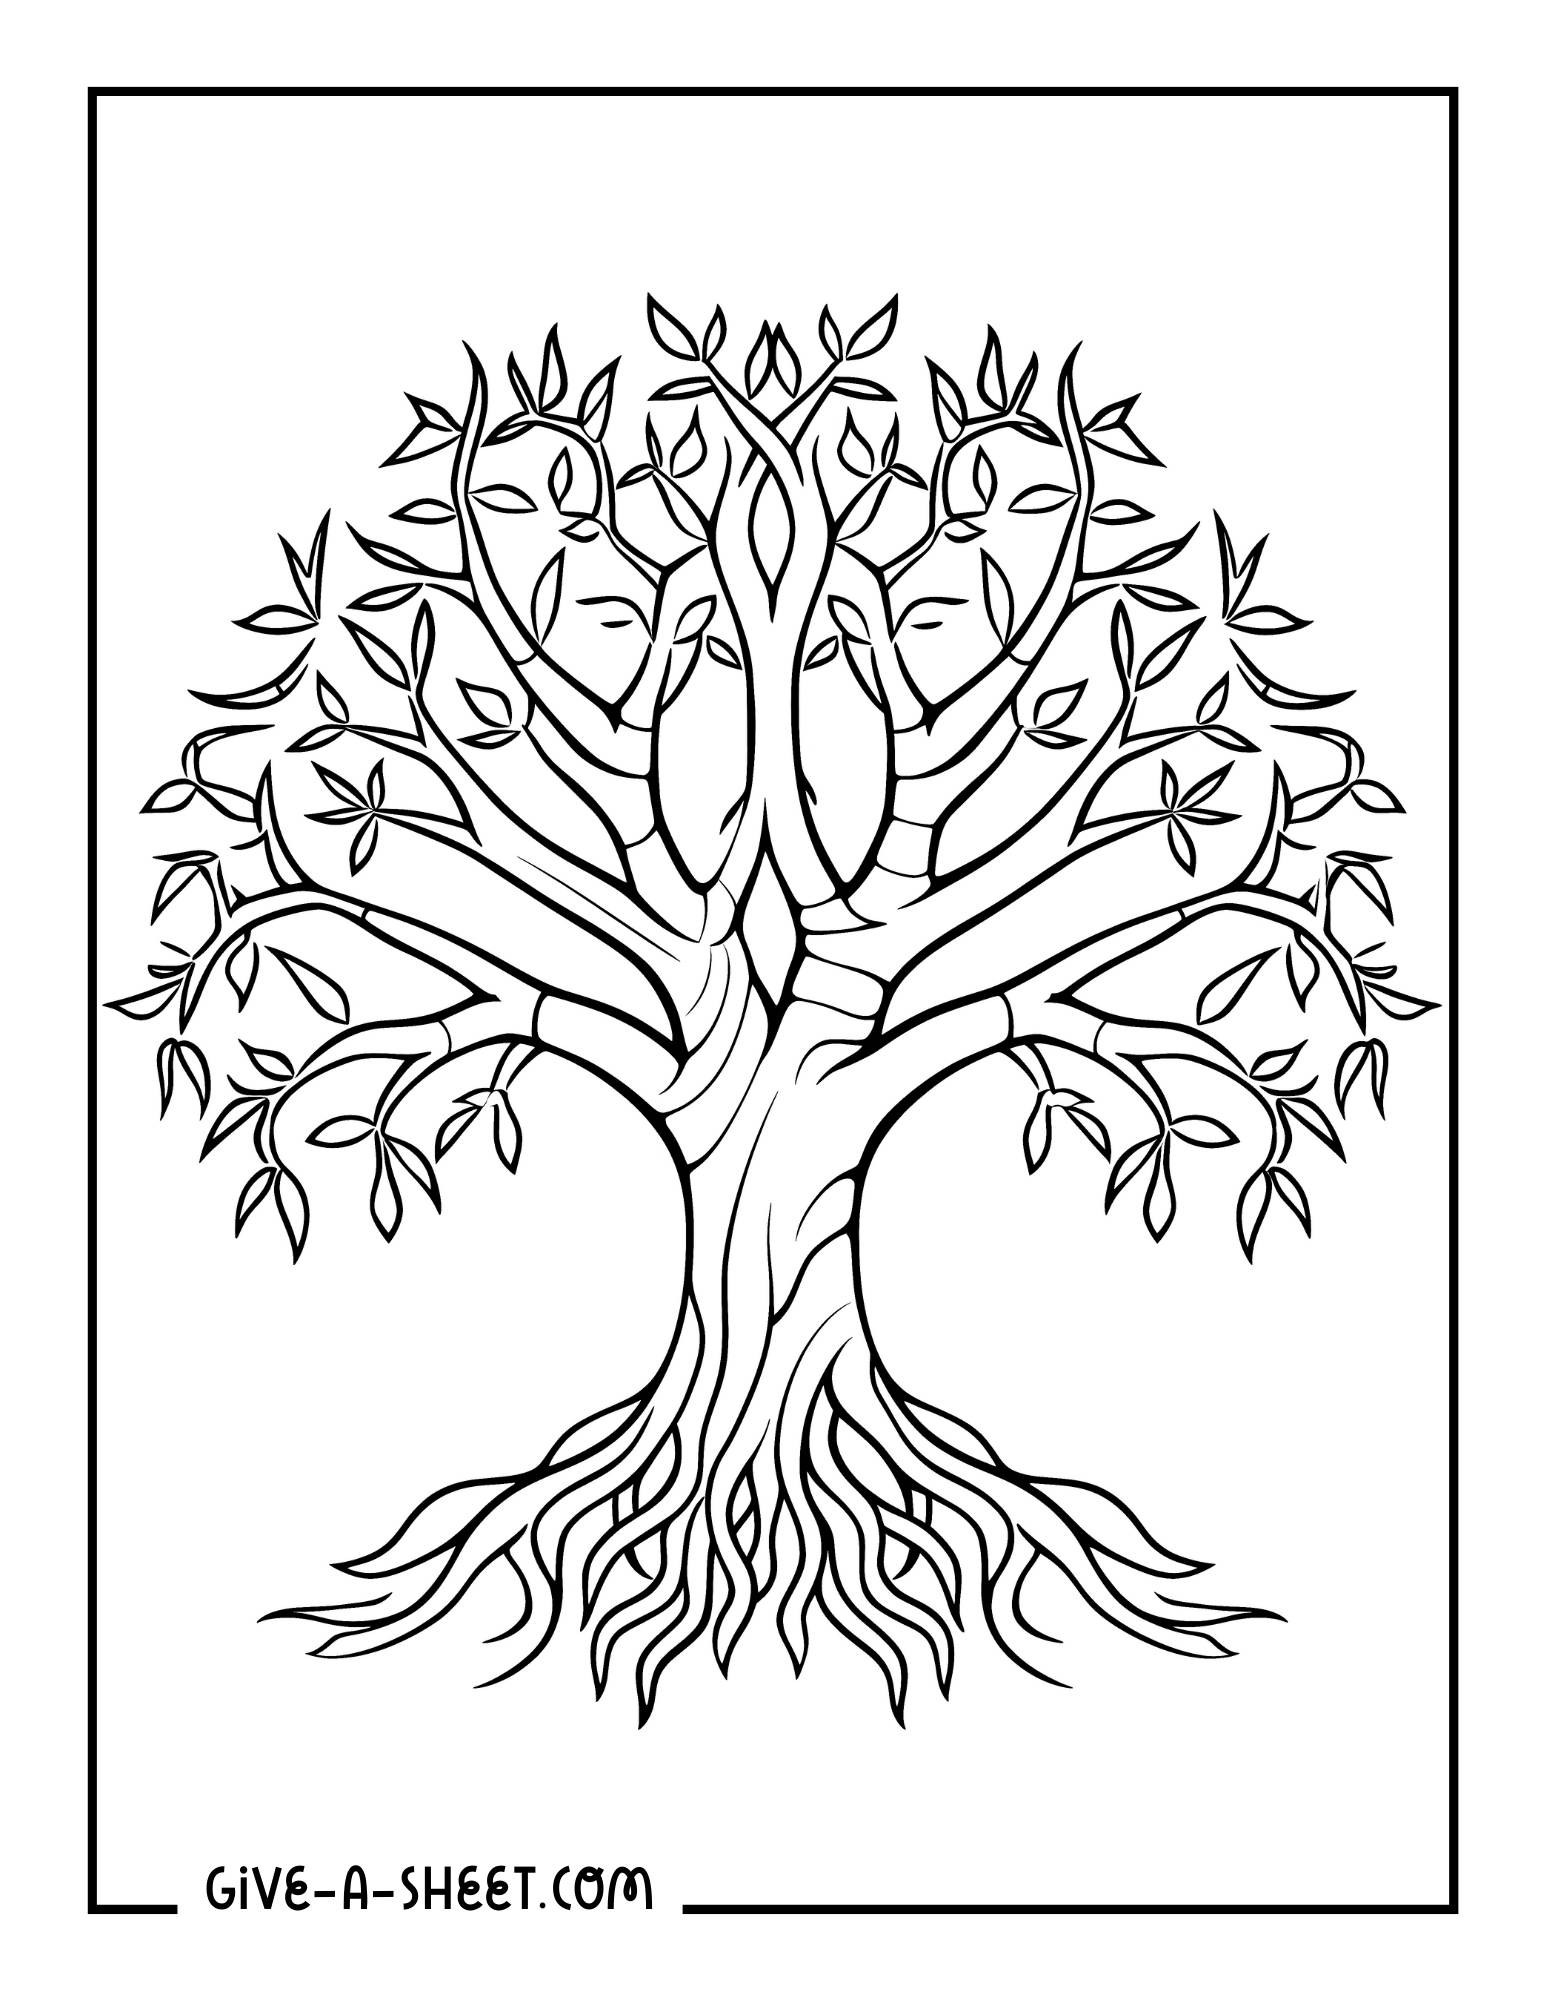 Cypress tree roots coloring page.